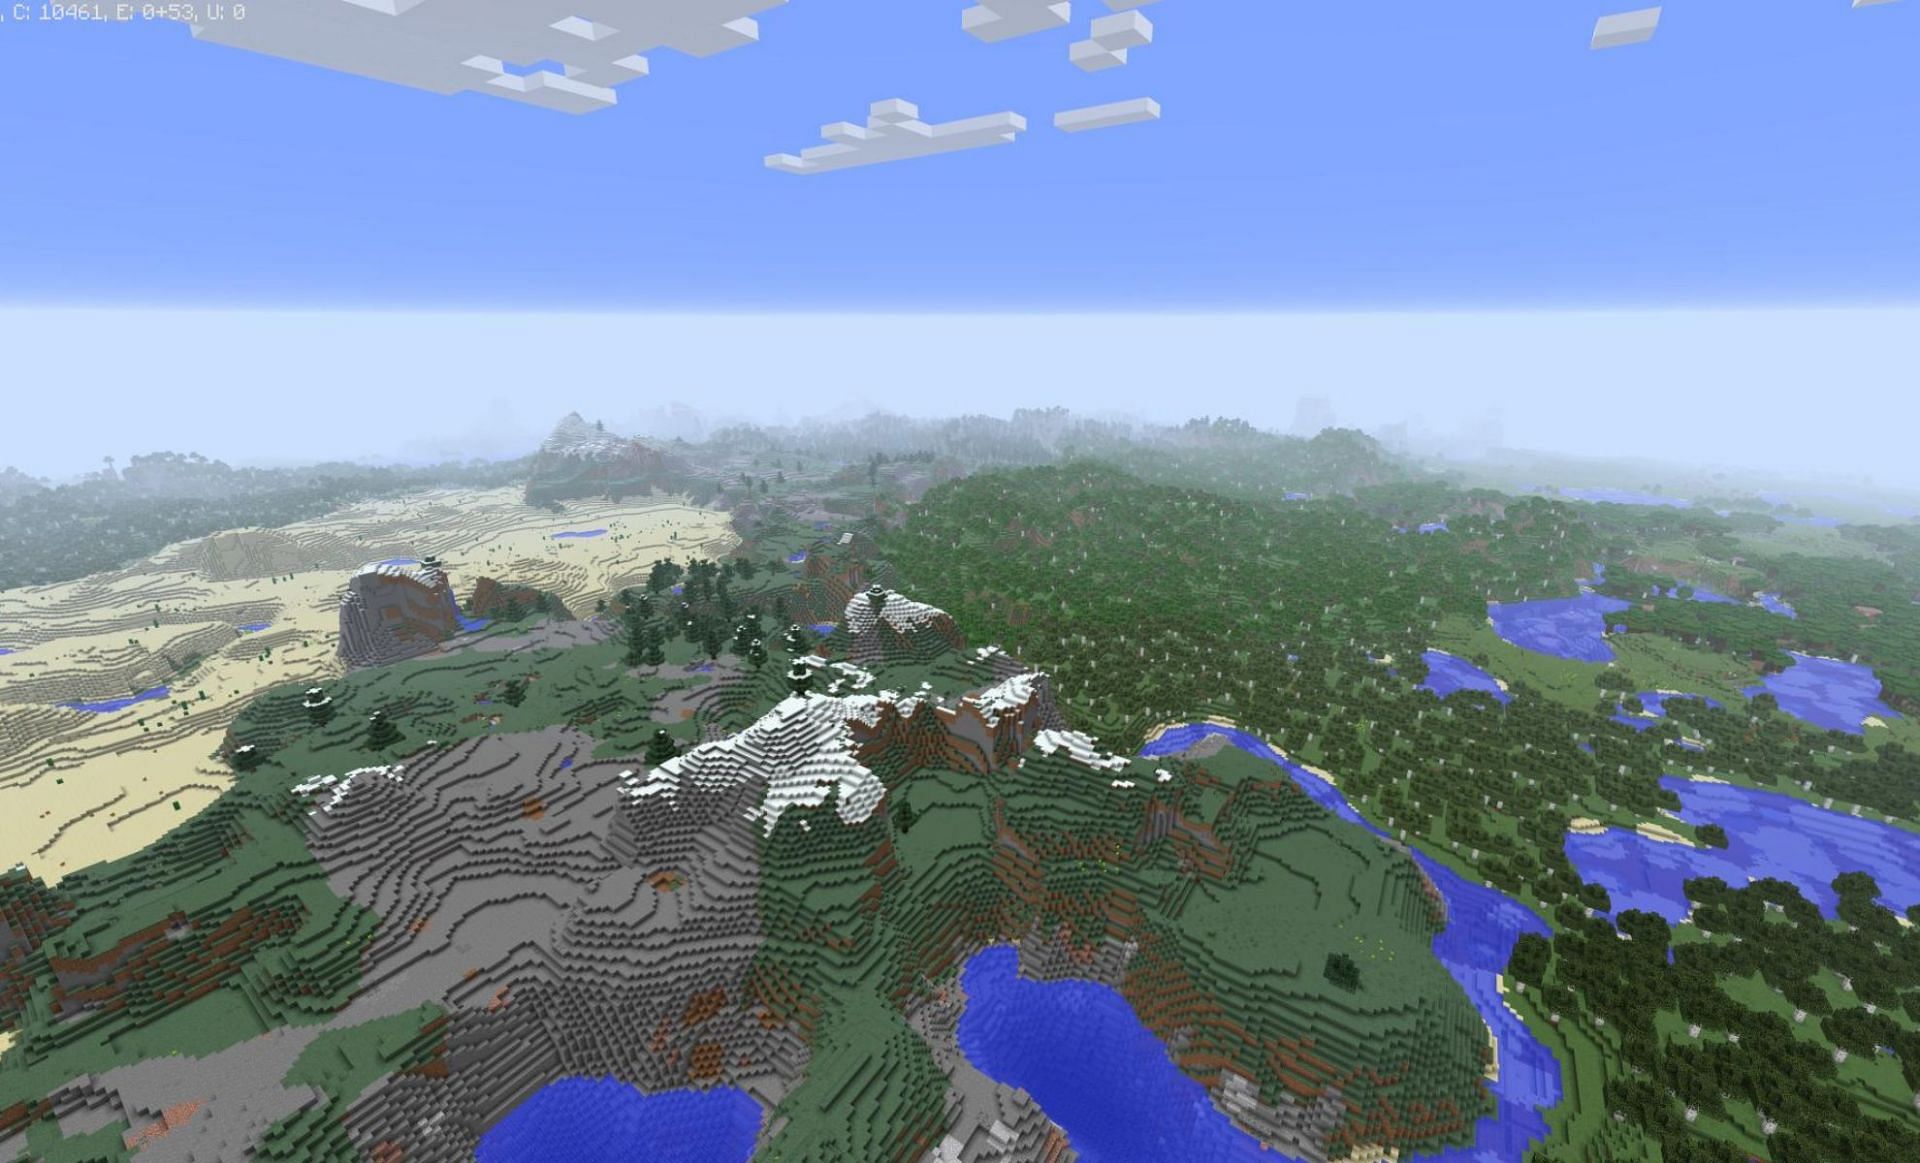 Modifying the Render Distance and Simulation Distance Settings on Your  Minecraft Server - Xgamingserver